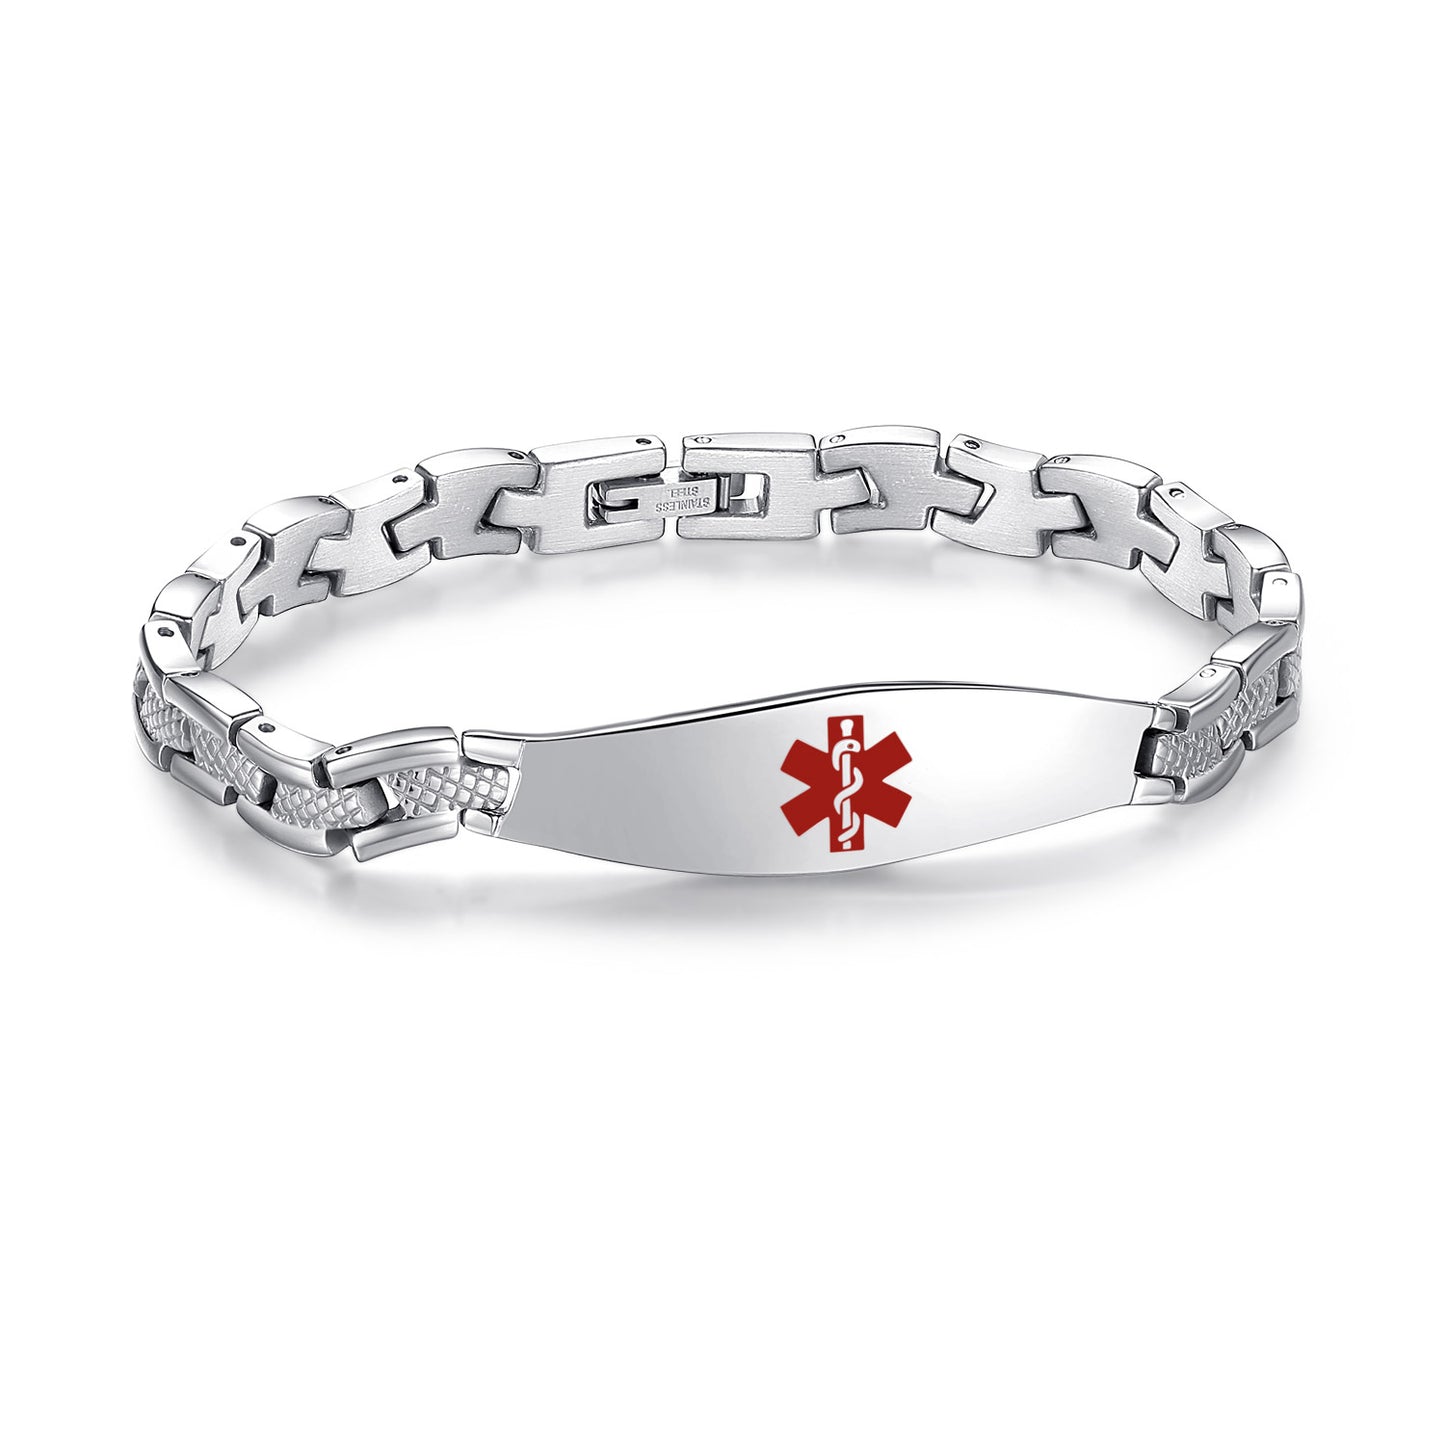 Mermaid Medical id bracelets for girl & Women with Free engraving